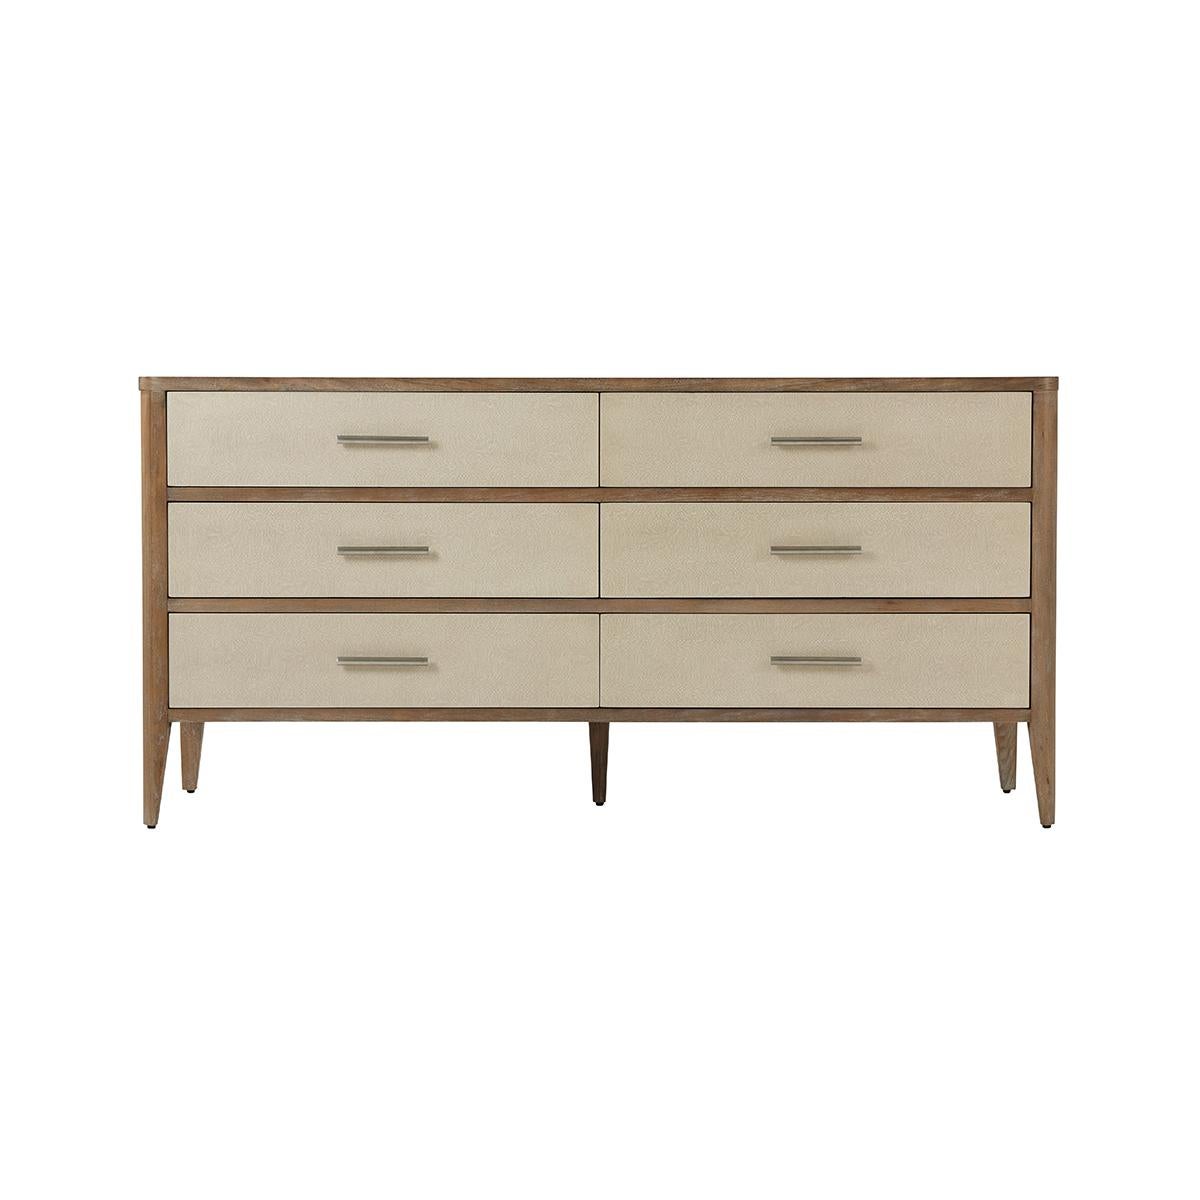 Leather Dresser in a light mangrove finish. The sides and the six drawers are wrapped in light overcast finish Komodo embossed leather. With brushed nickel finish hardware raised on flared tapering legs. 

Dimensions: 66.5